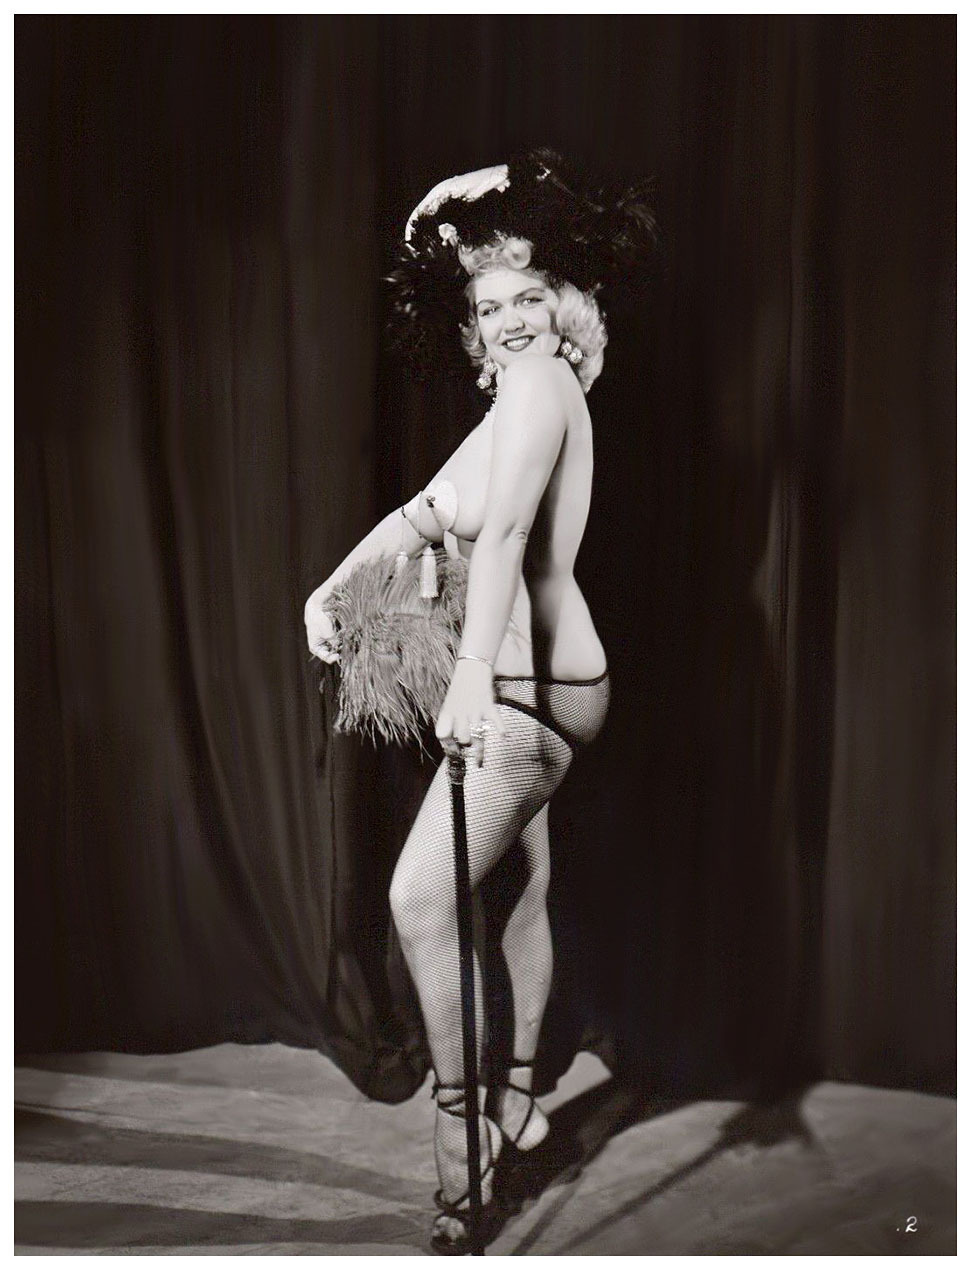 Jennie Lee              aka. “The Bazoom Girl”..Appearing in a publicity